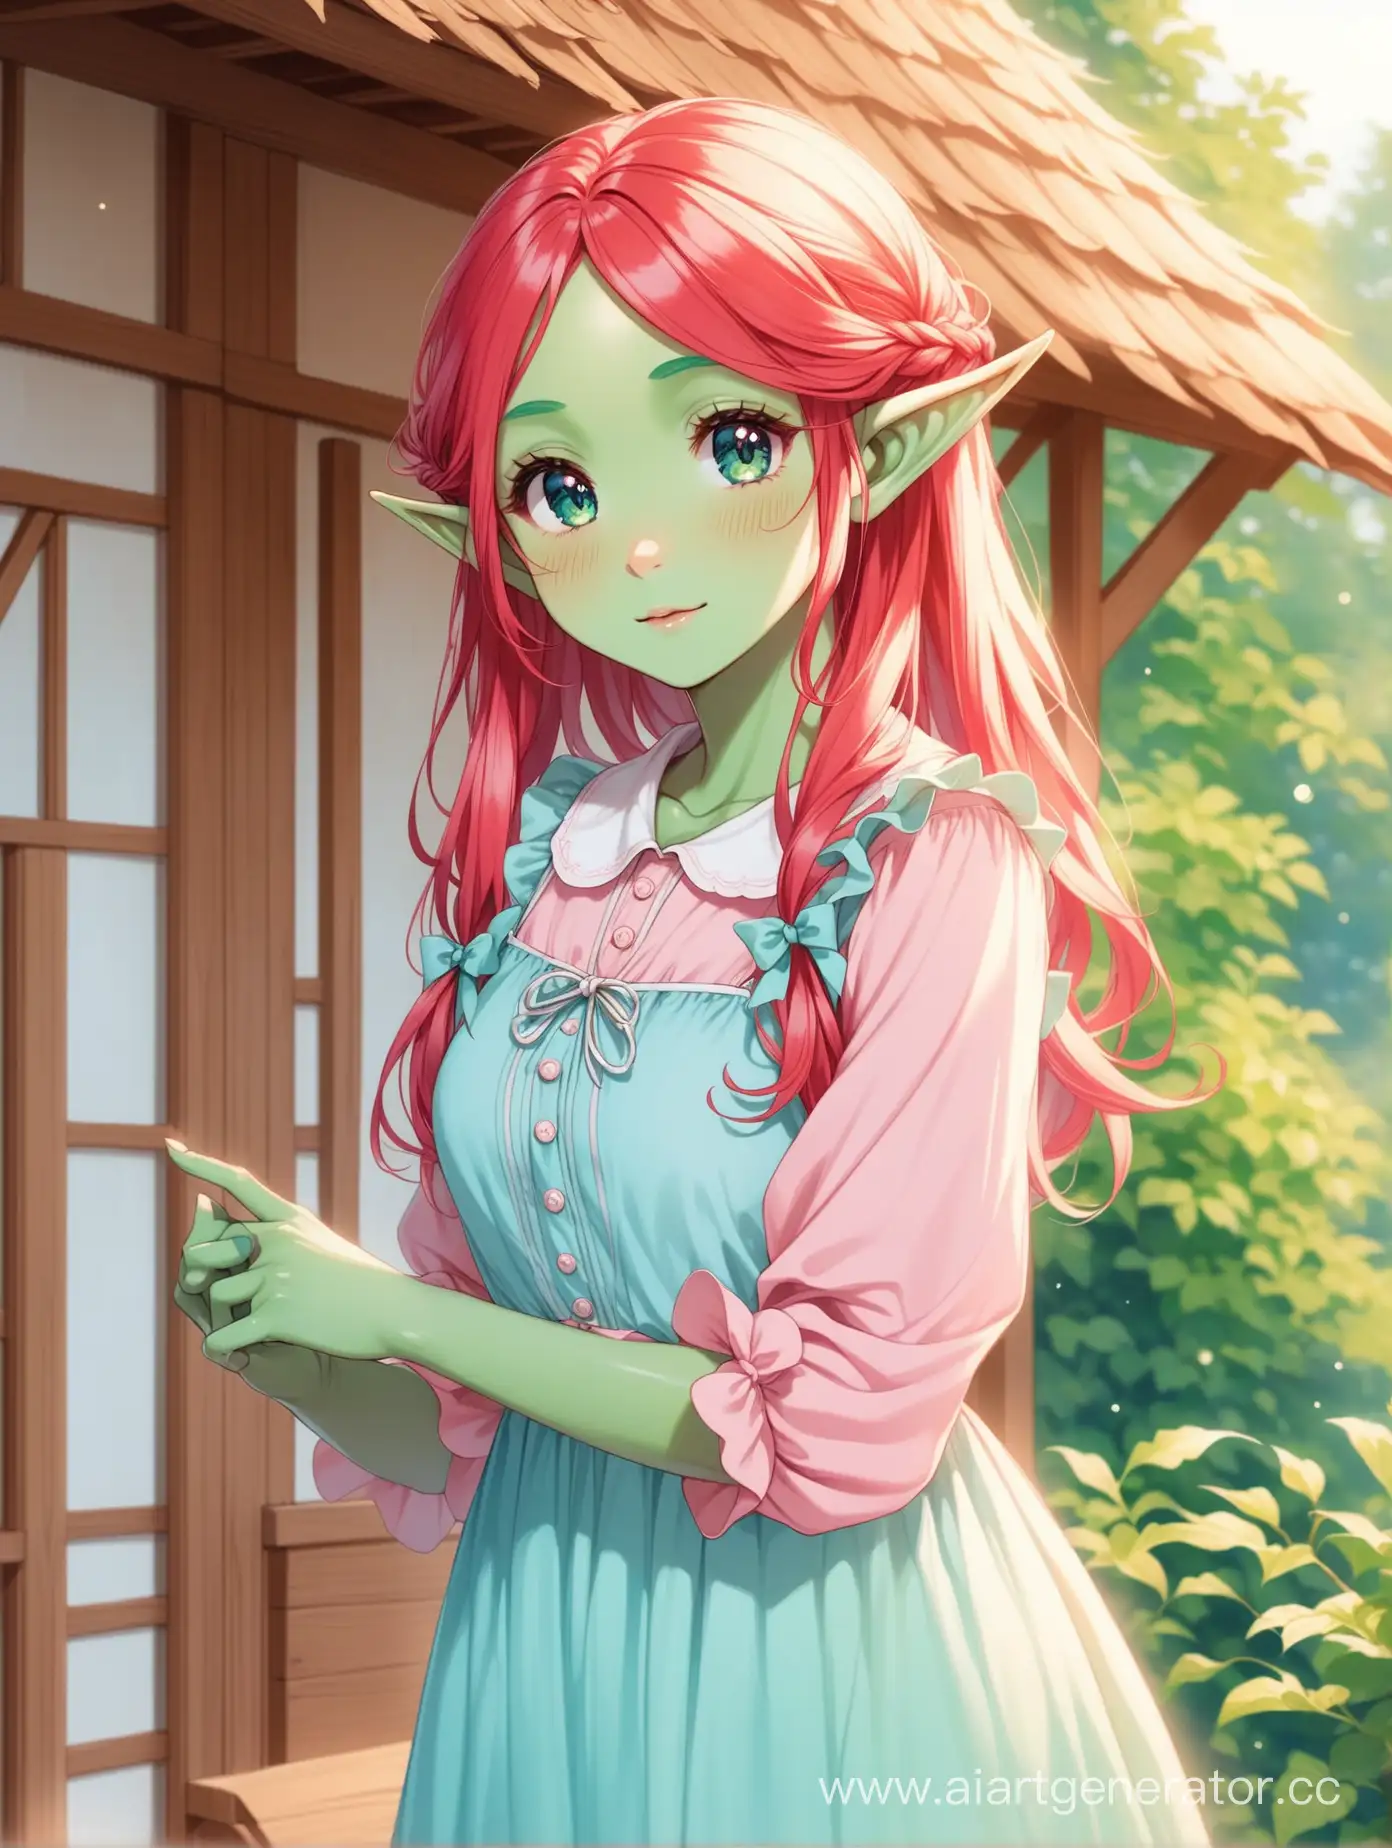 Enchanting-Elf-Girl-with-Green-Skin-and-Red-Hair-in-Pastel-Blue-and-Pink-Dress-in-Cottage-Farm-Setting